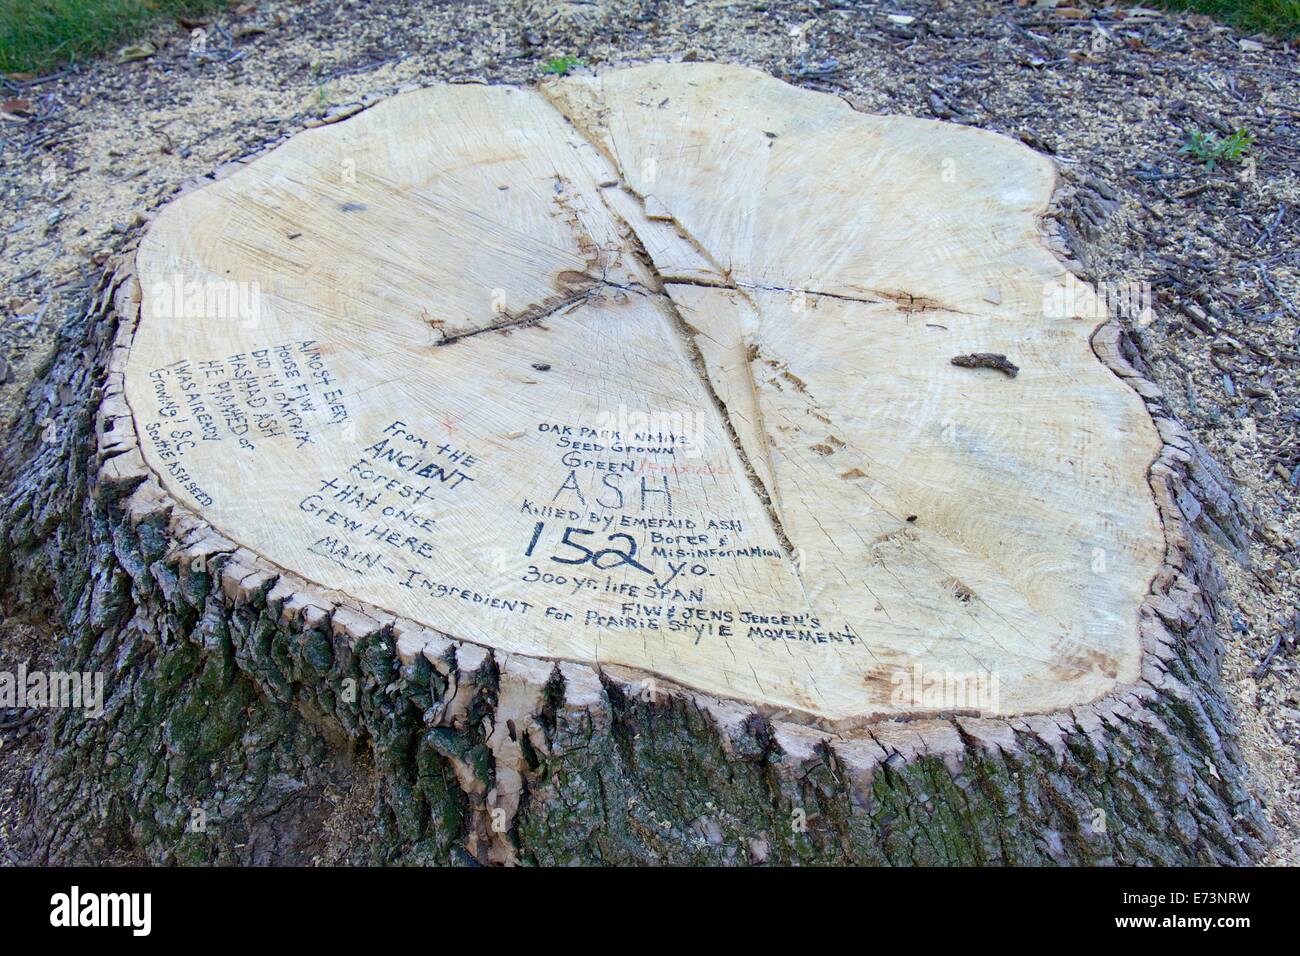 Stump of 152 year old green ash killed by emerald ash borer. Historic nature of ash trees place on tree with marker pen. Stock Photo